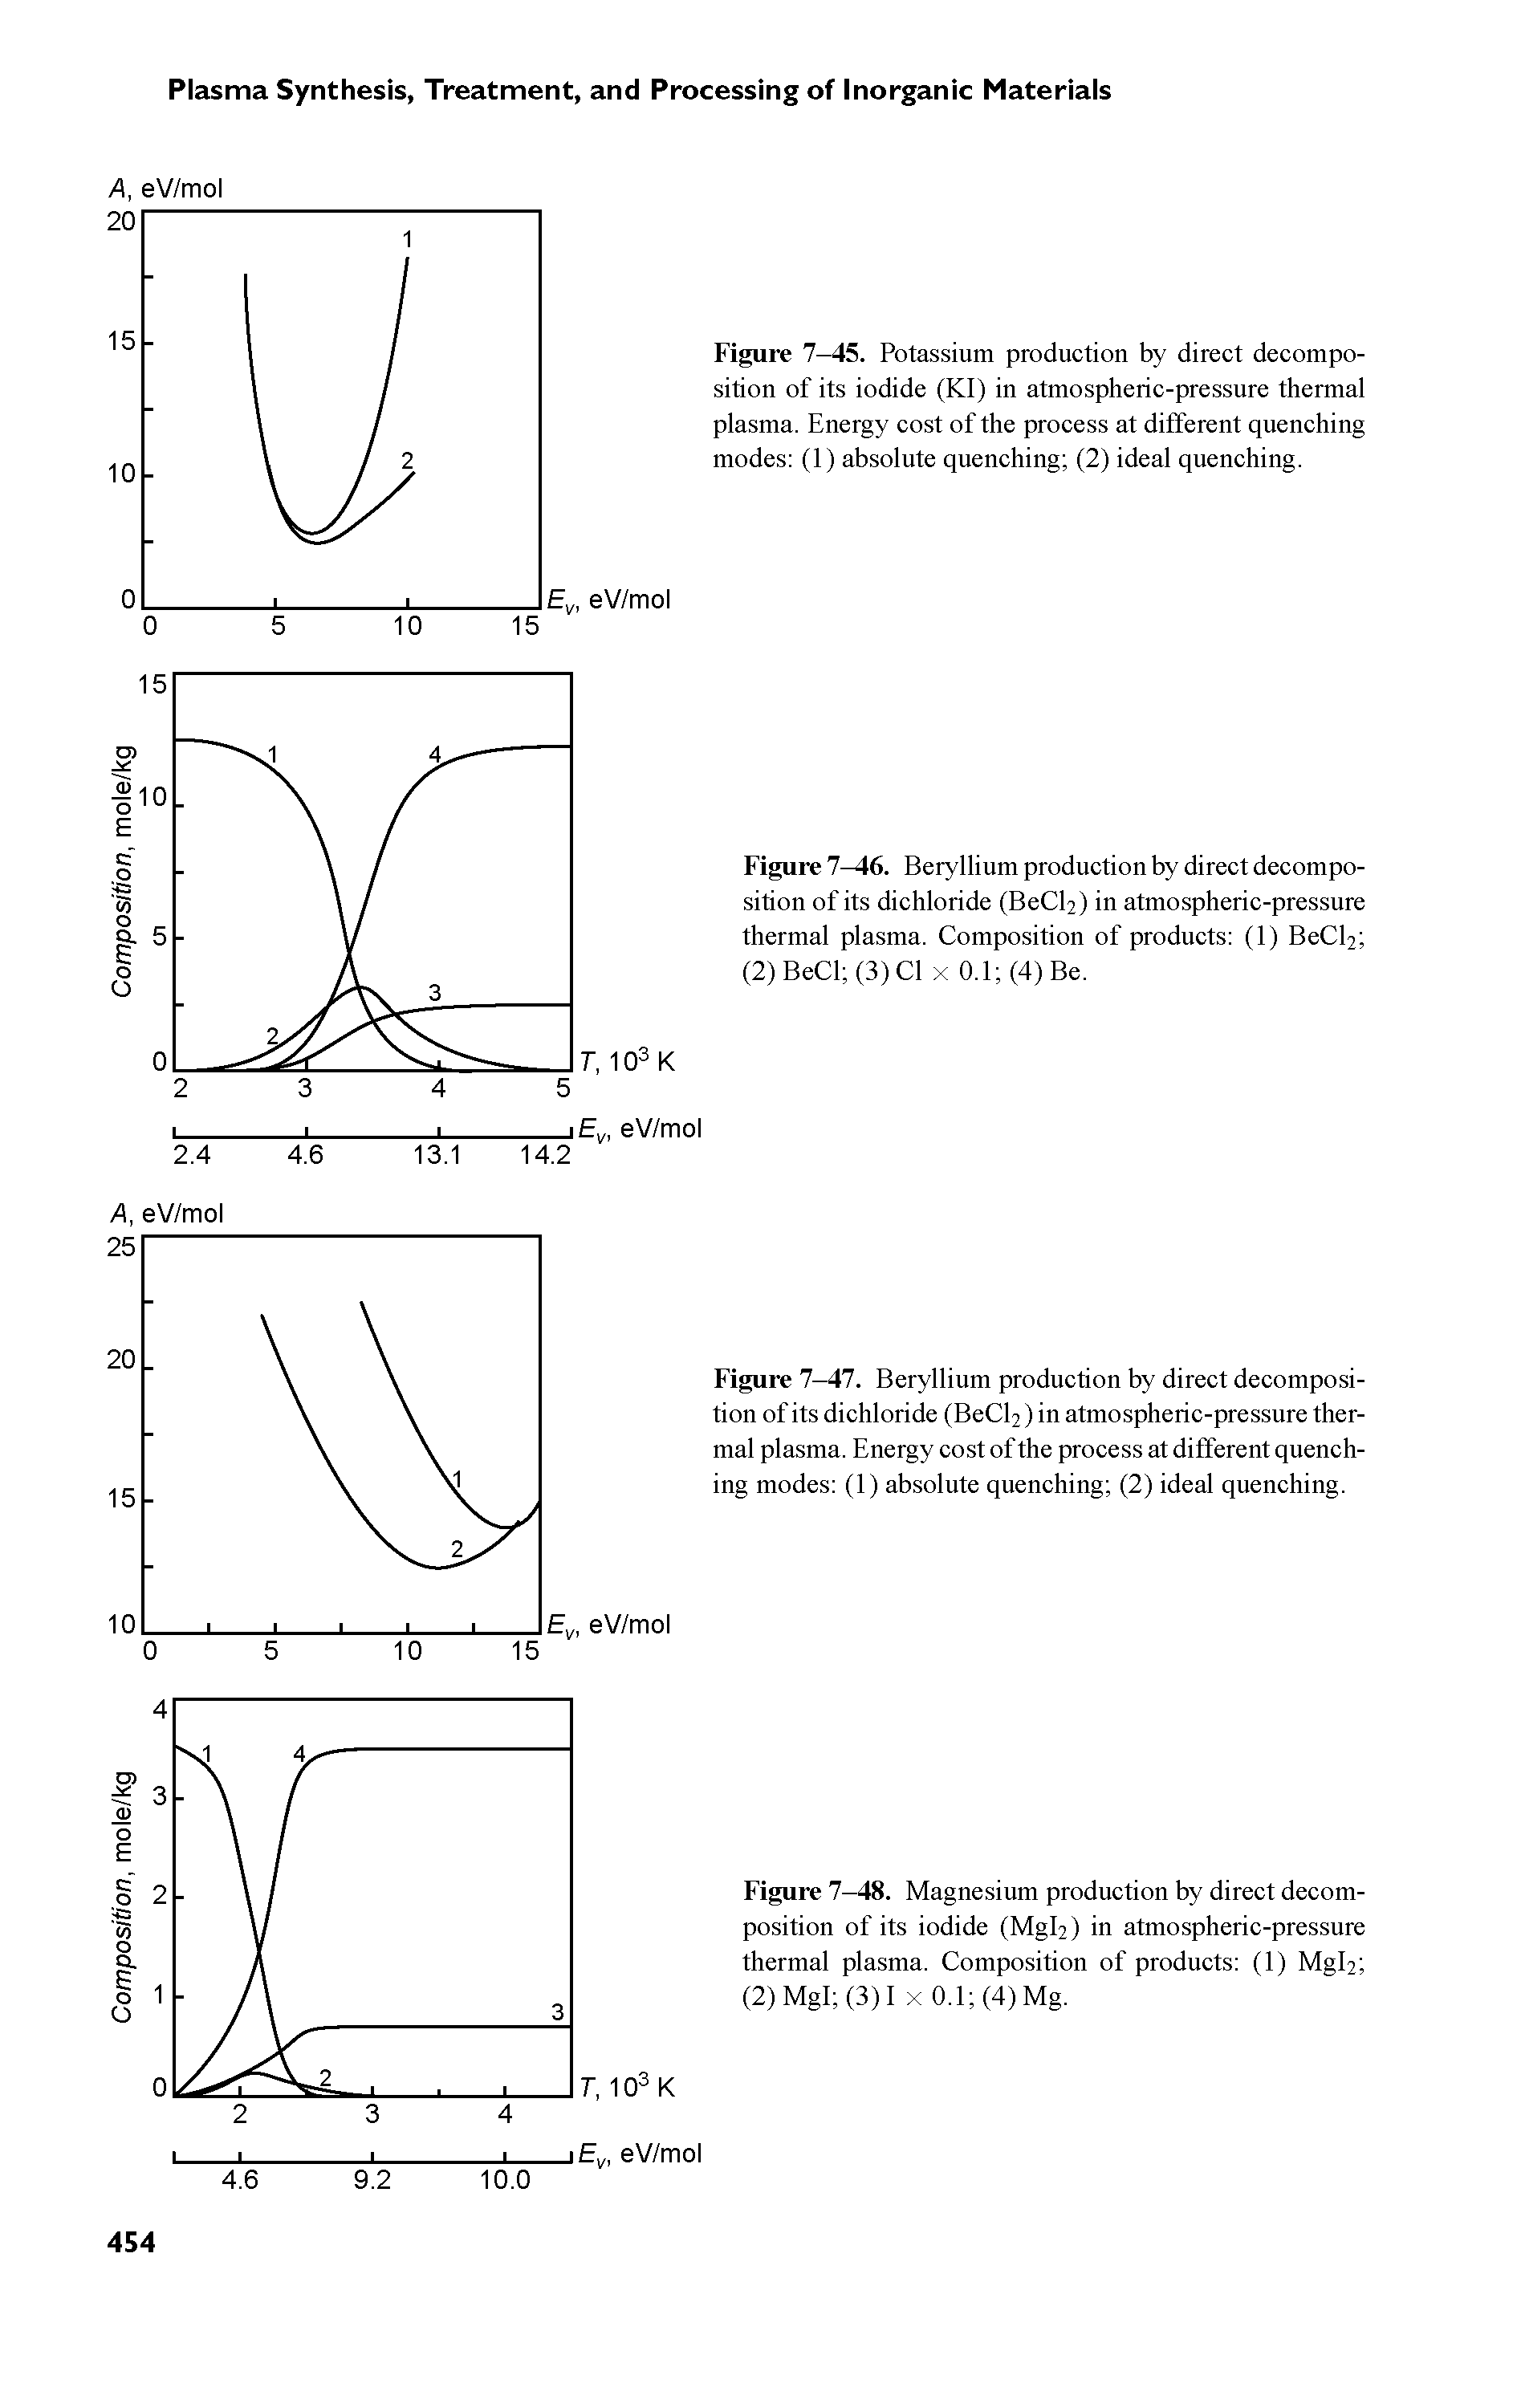 Figure 1—A(>. Beryllium production by direct decomposition of its dichloride (BeCl2) in atmospheric-pressure thermal plasma. Composition of products (1) BeCl2 (2)BeCl (3) Cl x 0.1 (4) Be.